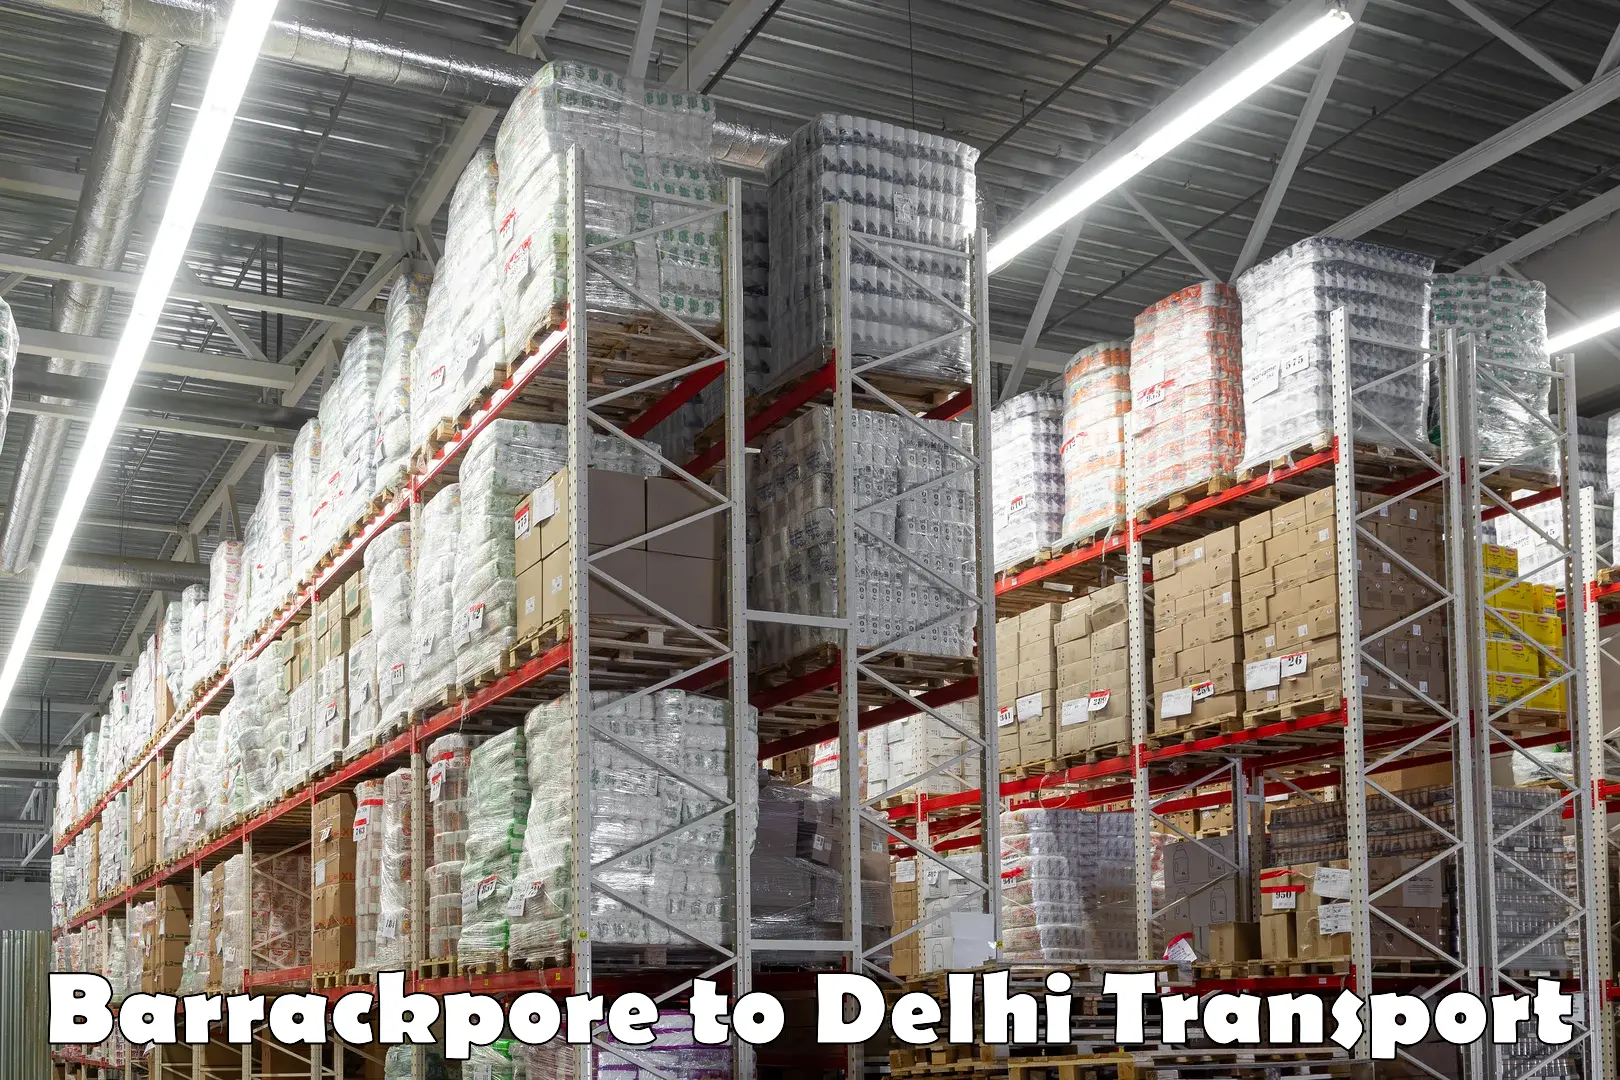 Transport in sharing Barrackpore to Delhi